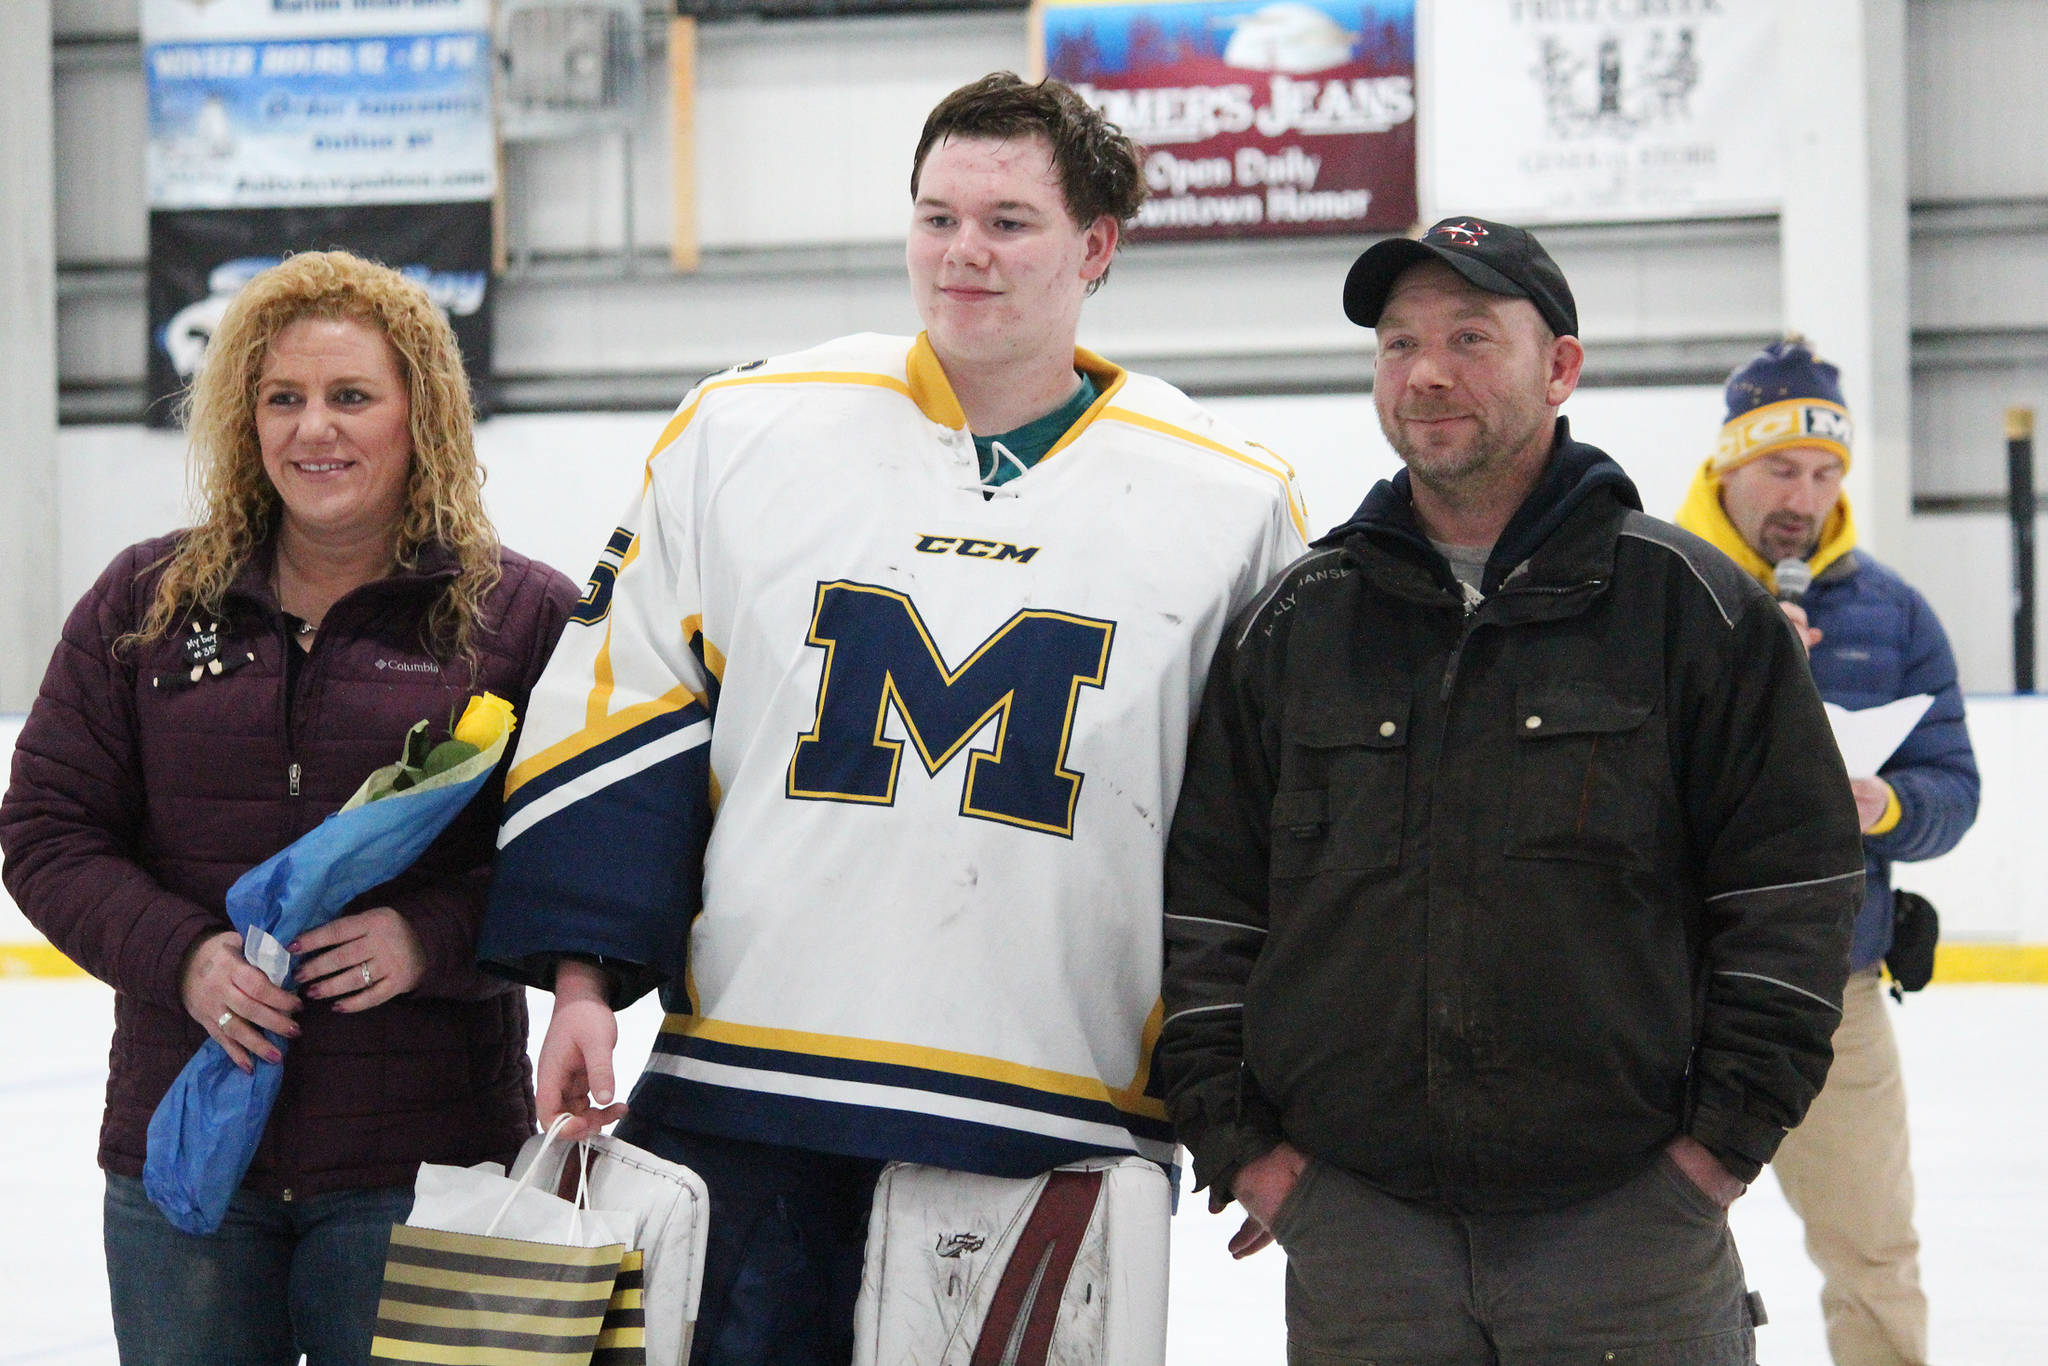 Homer senior Connor Roderick is honored with his parents on Senior Night for the Homer High School hockey team Thursday, Jan. 24, 2019 at Kevin Bell Ice Arena in Homer, Alaska. The Mariners defeated Houston High School 10-1. (Photo by Megan Pacer/Homer News)